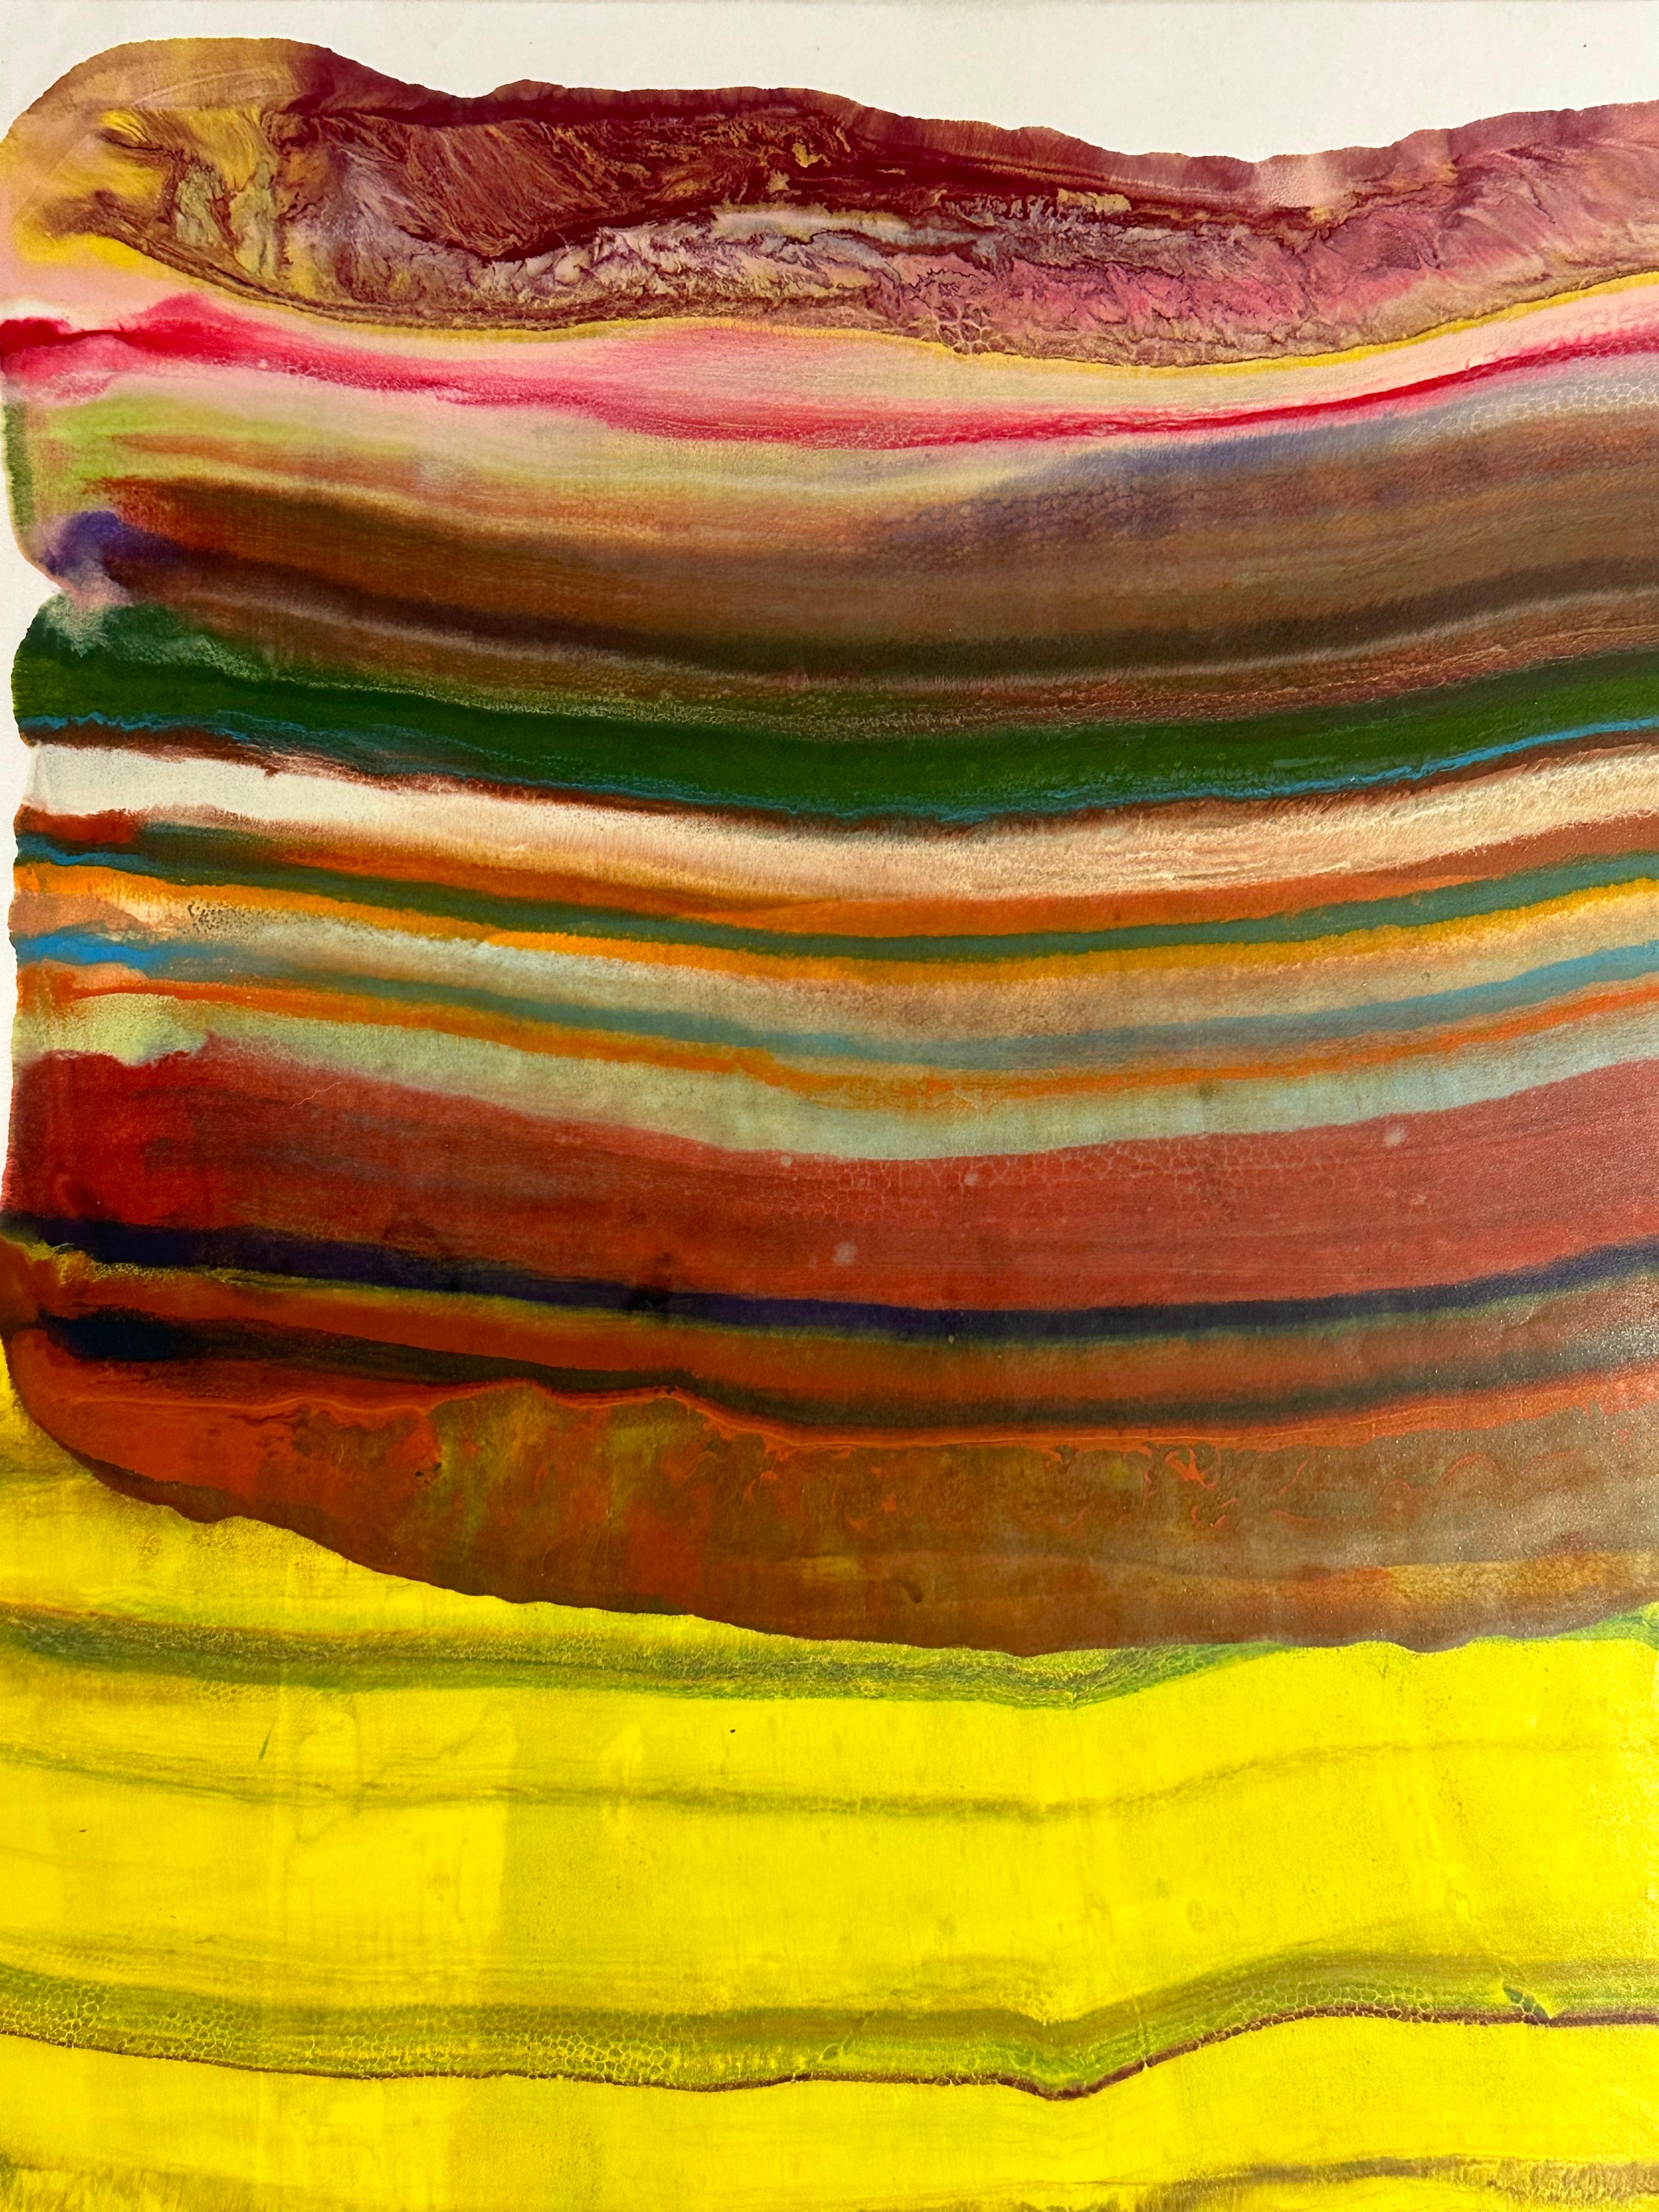 Laura Moriarty's Ex Uno Plures 8 is a multicolored encaustic monotype on kozo paper. Layers of pigmented beeswax on lightweight paper create an undulating composition suggesting layers of the earth's crust and geological formations depicted in pink,